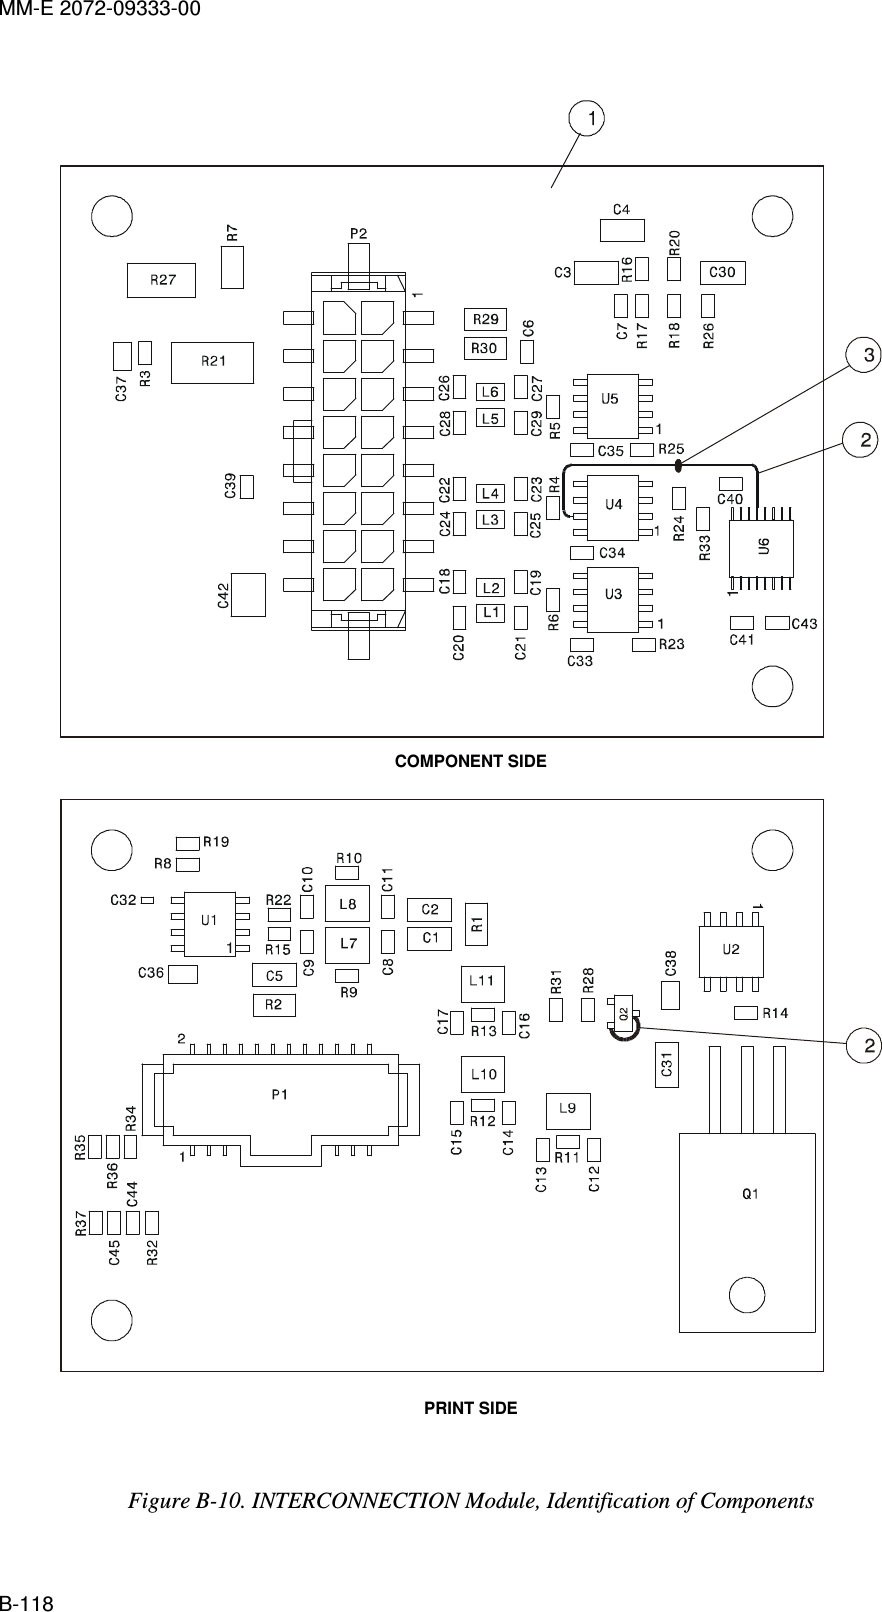 MM-E 2072-09333-00 B-118     COMPONENT SIDE  PRINT SIDE  Figure  B-10. INTERCONNECTION Module, Identification of Components  